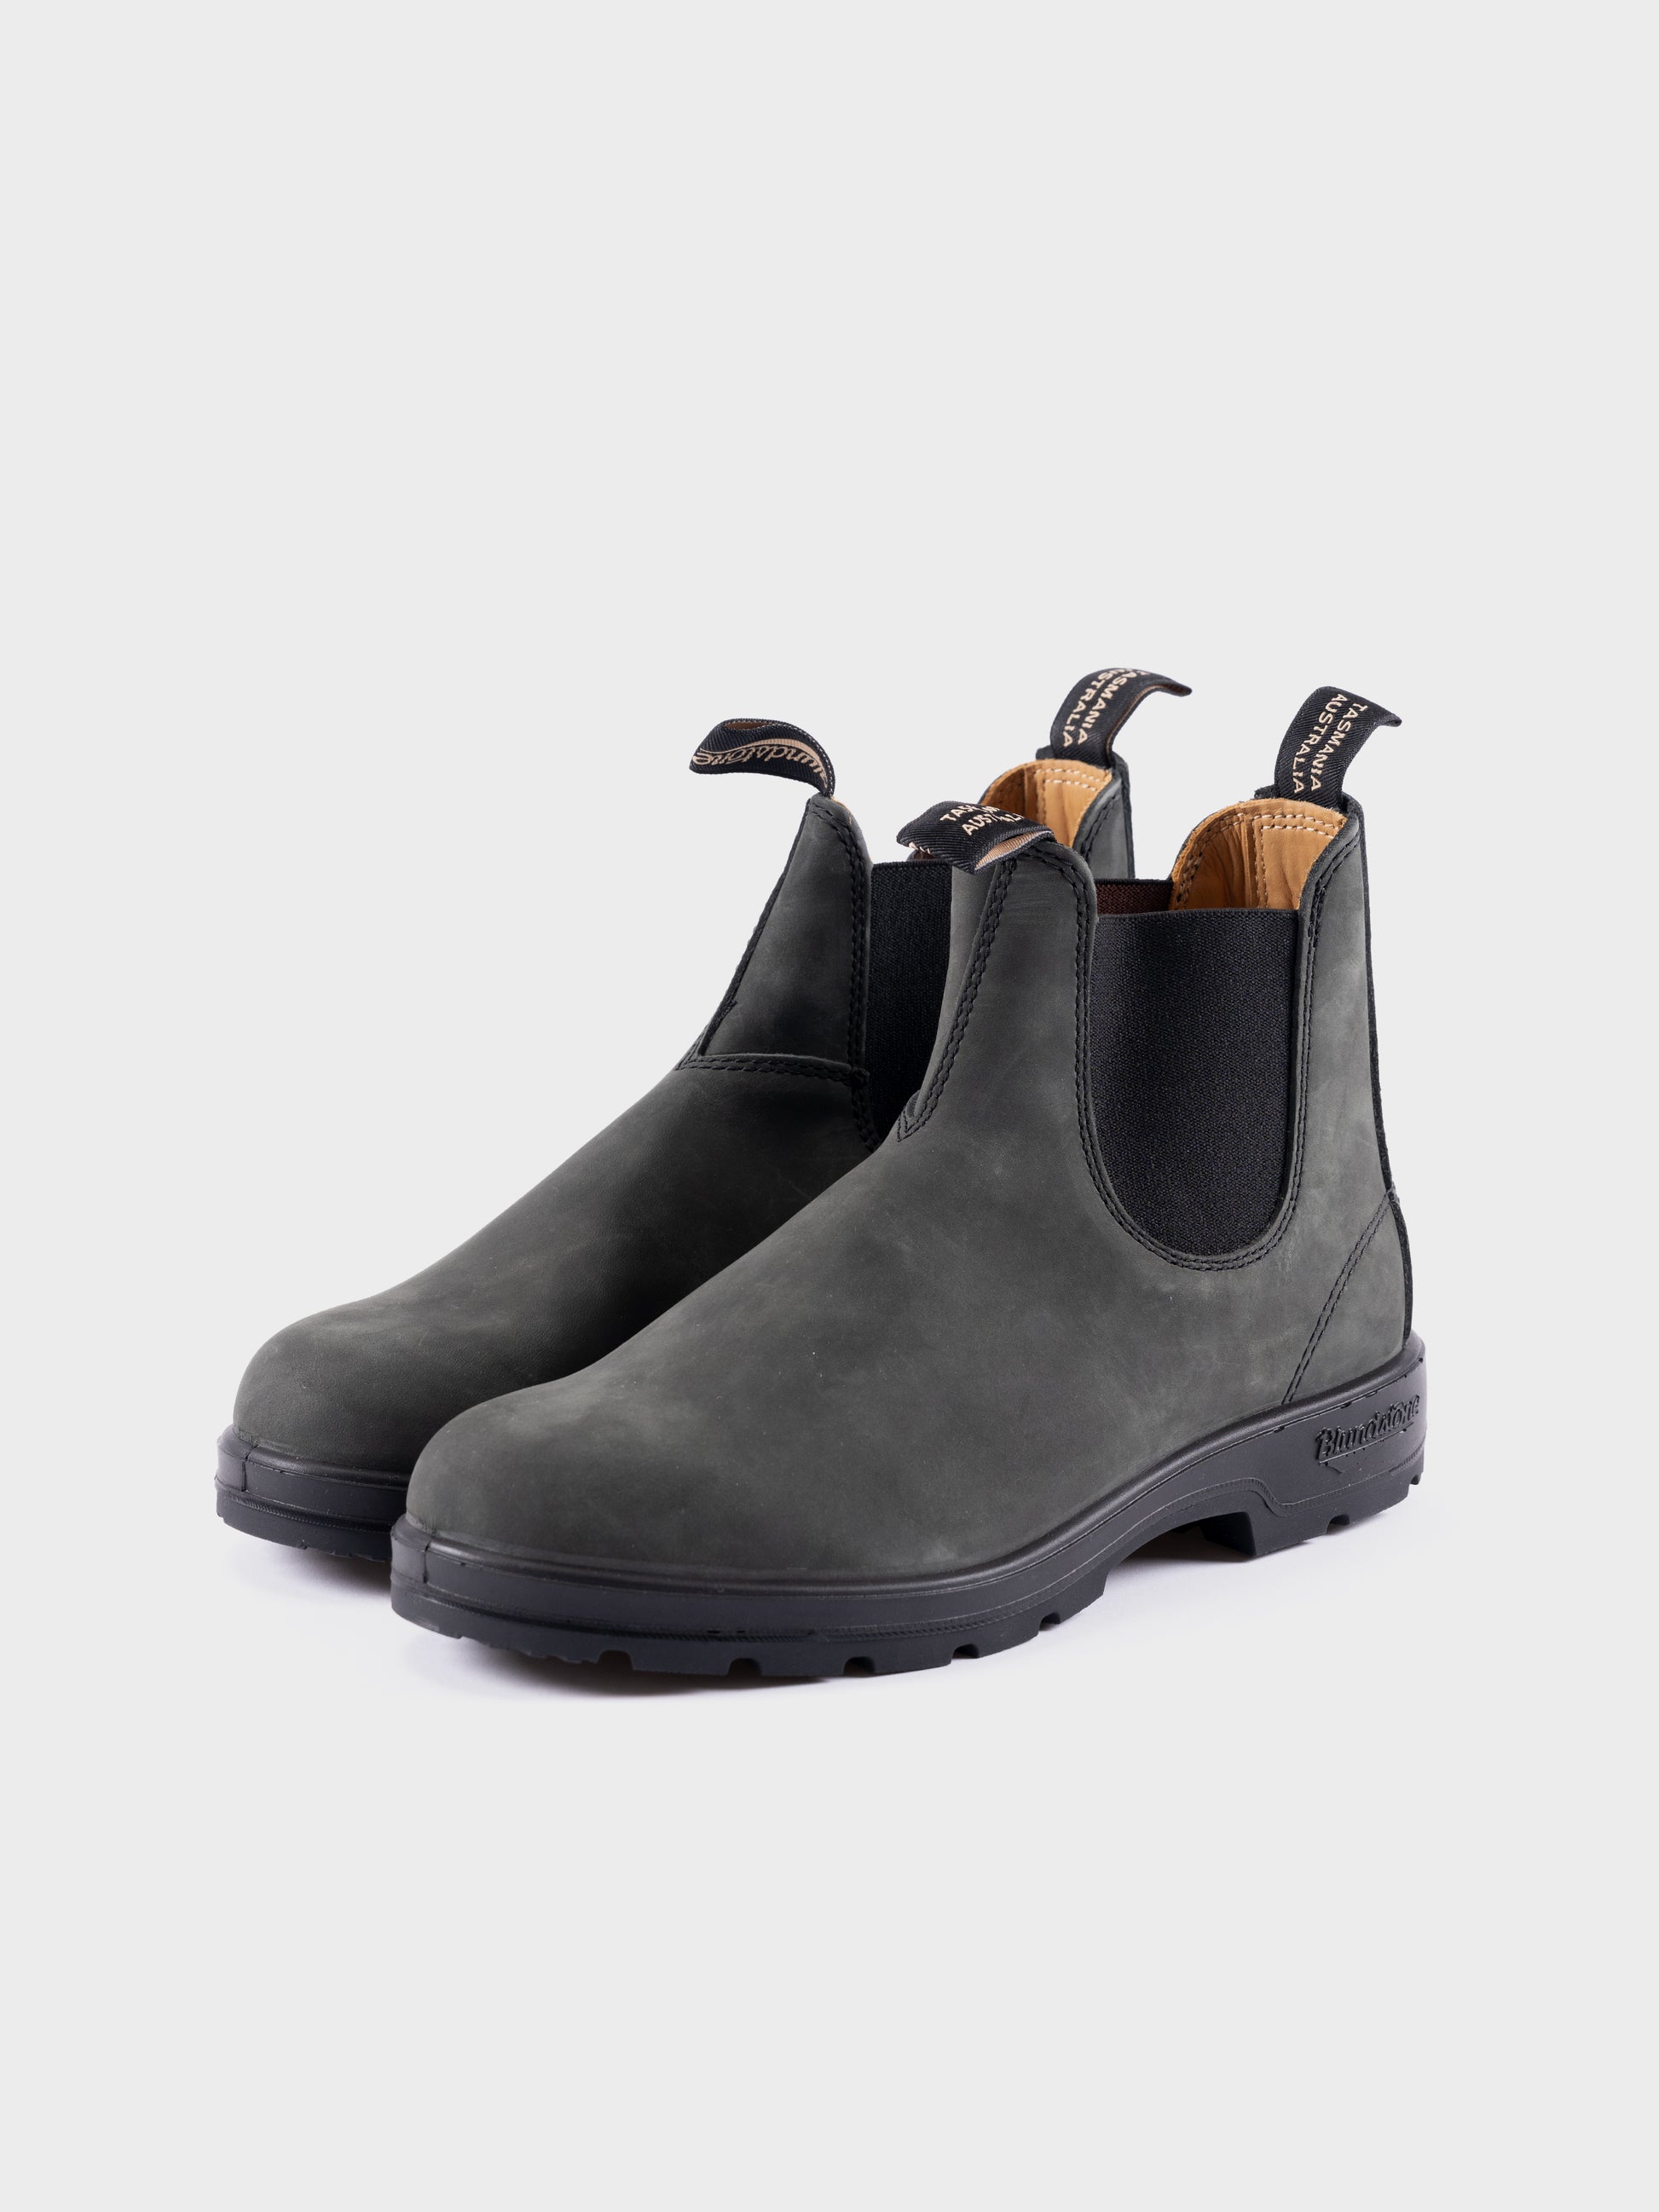 Blundstone Boots - 587 - Rustic Black Leather